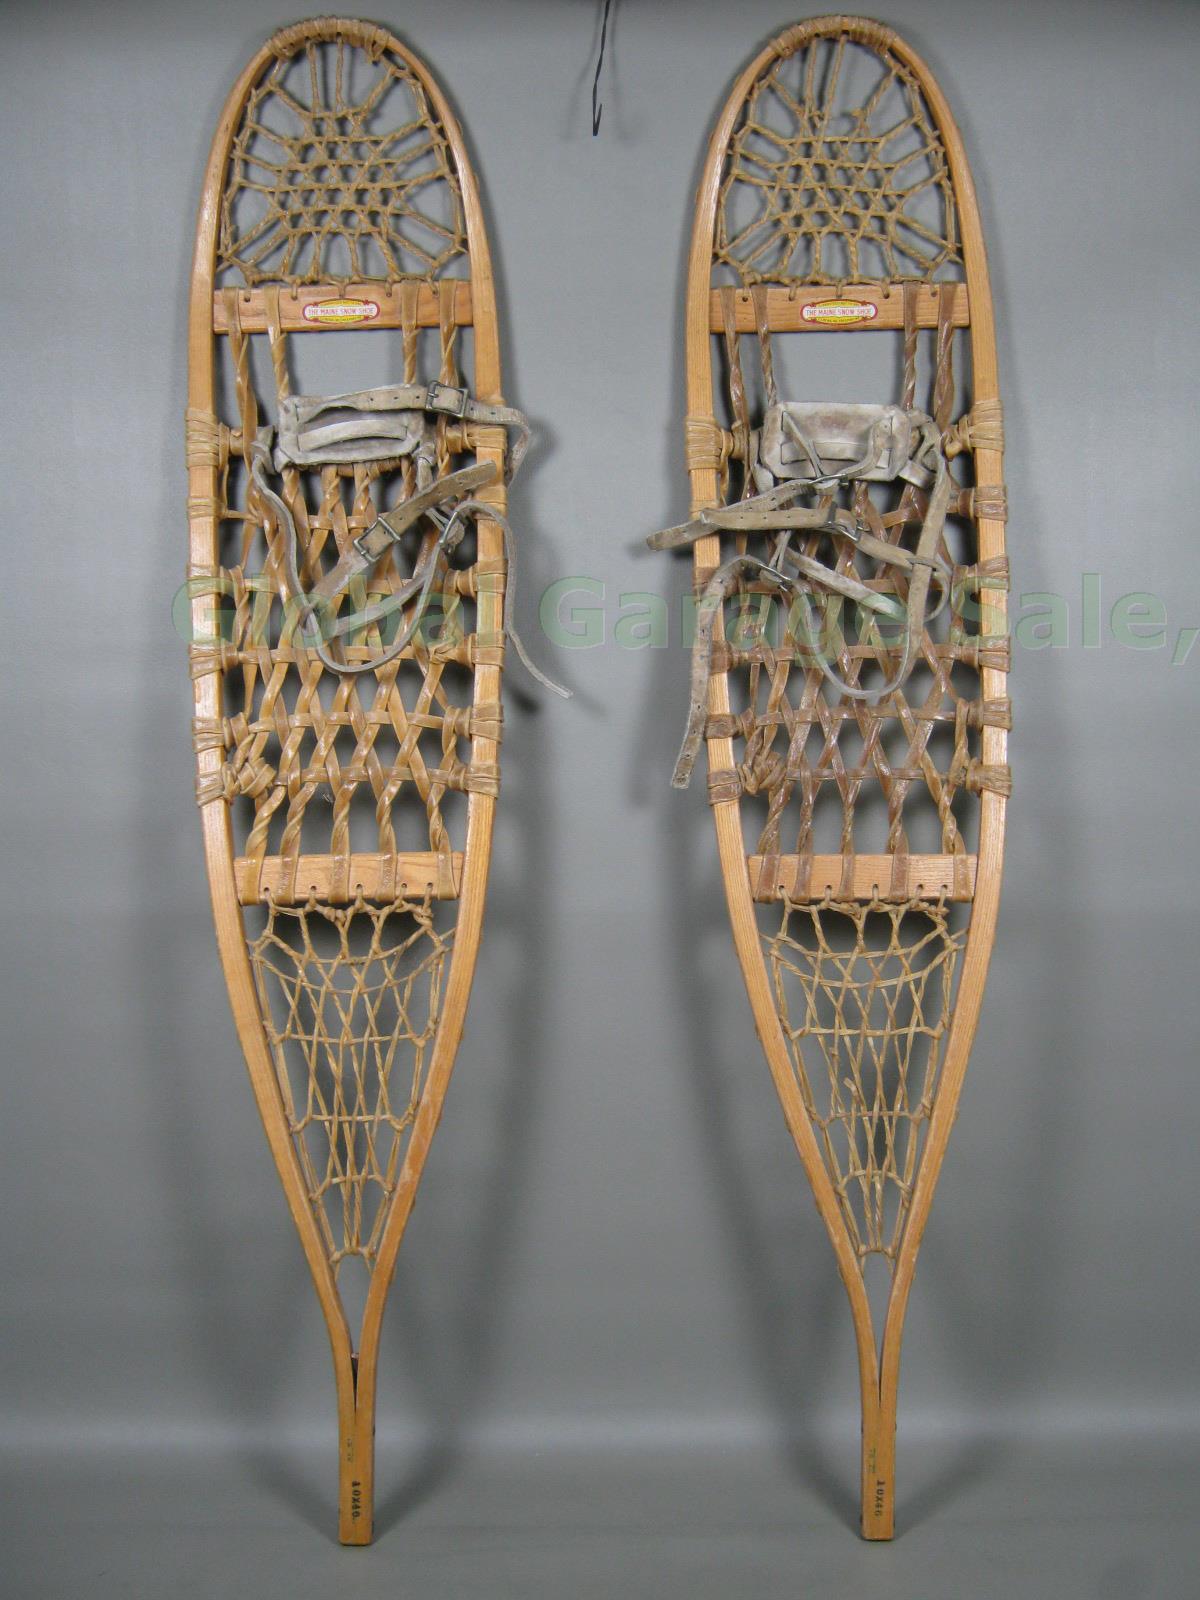 Vtg Antique LL Bean The Maine Wooden Snowshoes 10x46 Made In Freeport Maine NR!!